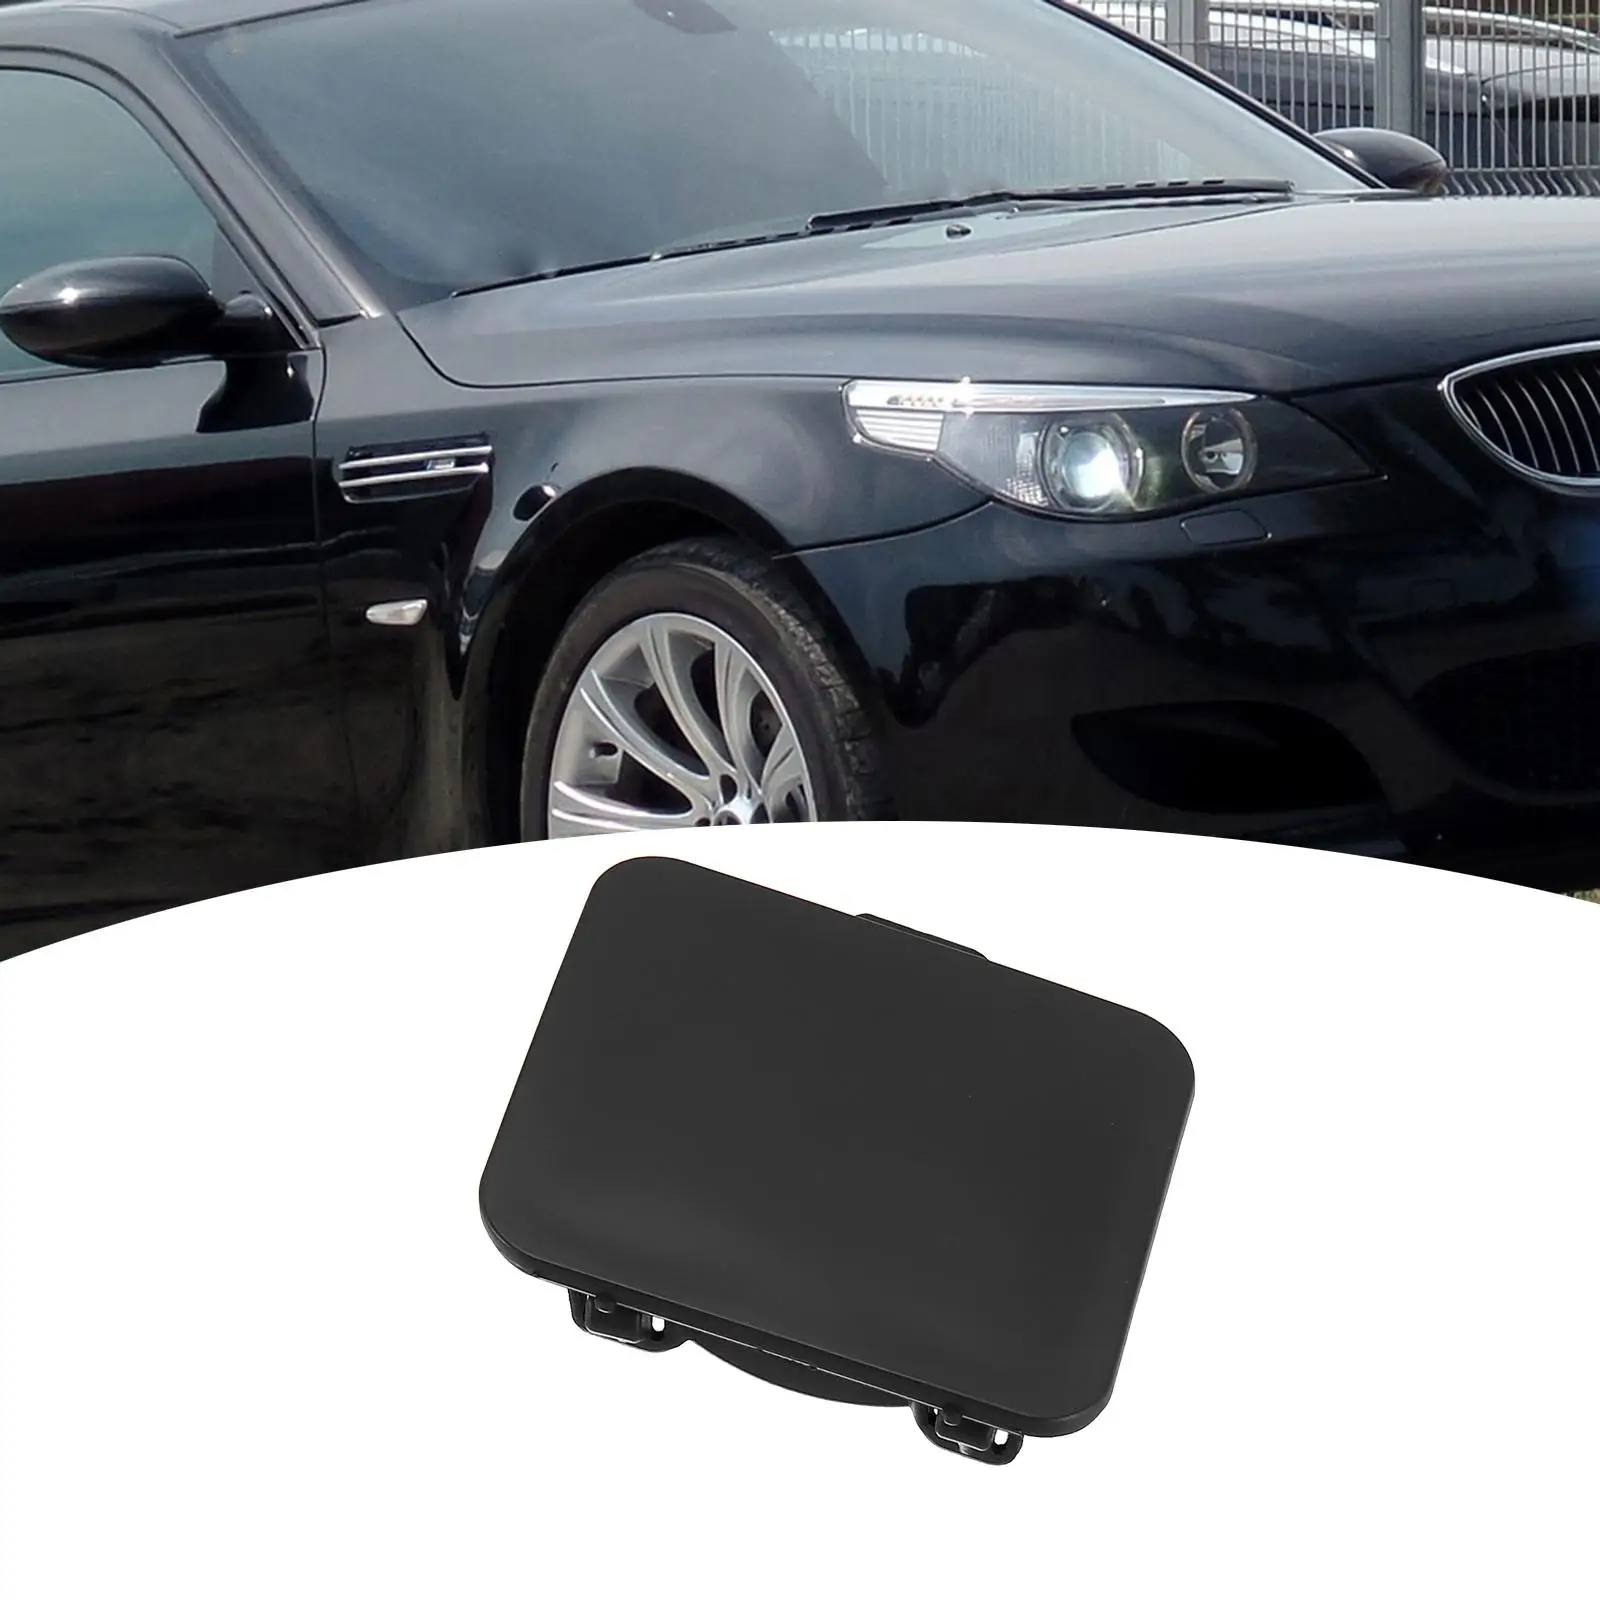 

Front Bumper Tow Eye Hook Cover Cap Directly Replace Black 51117896585 for BMW E60 M Sport 2003-2010 Automotive Accessories